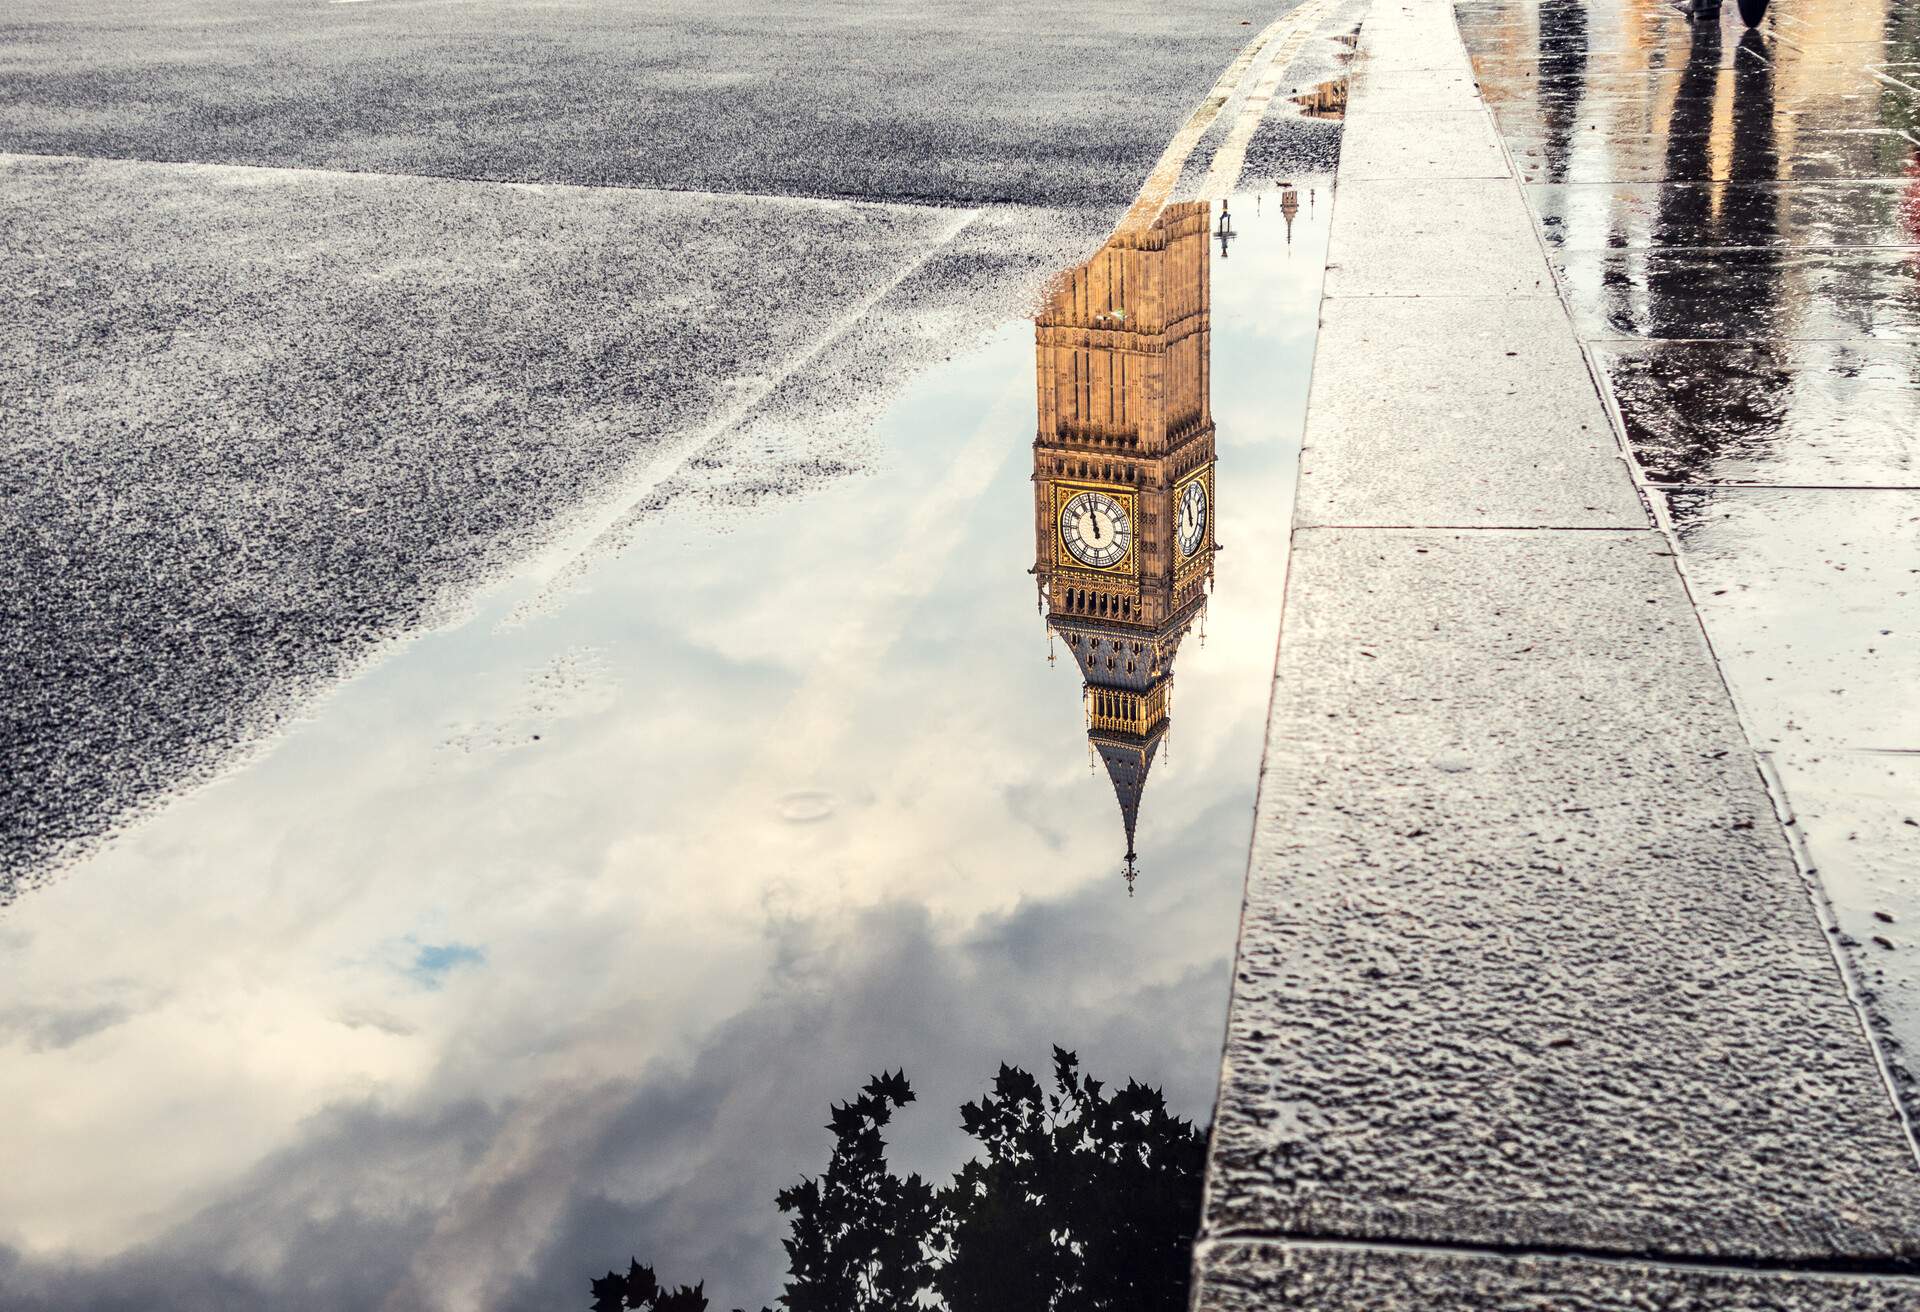 The Big Ben tower reflecting in a puddle along the sidewalk.